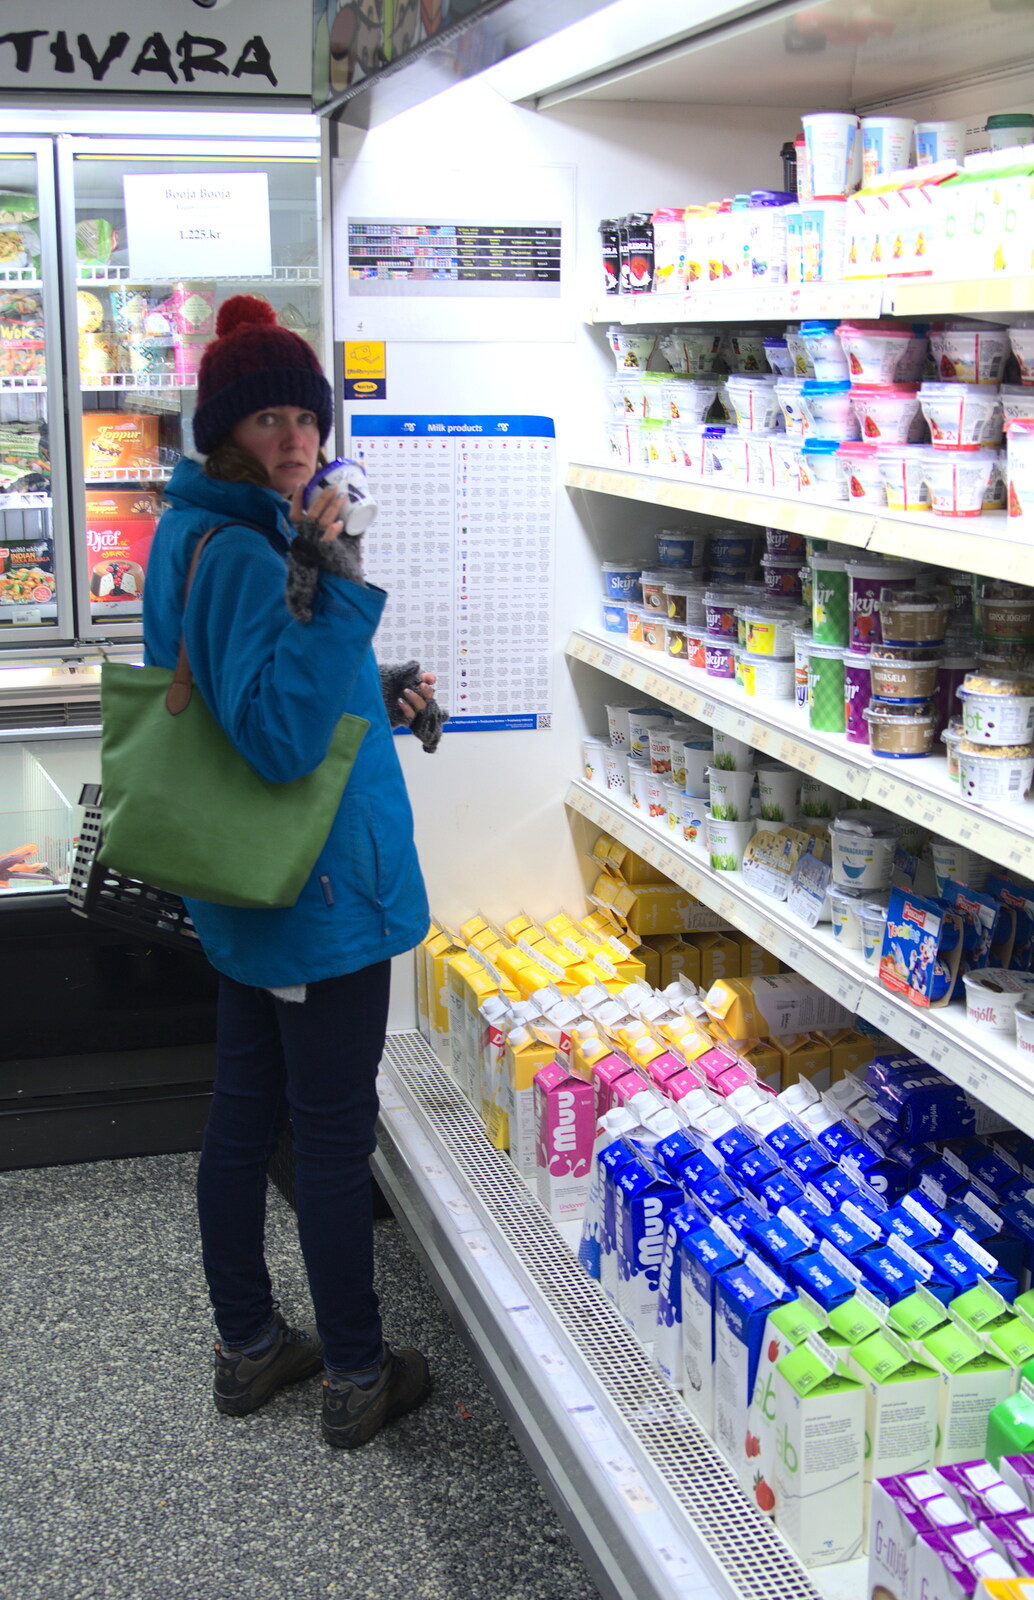 Isobel gets some Skyr from the supermarket from Hallgrímskirkja Cathedral and Whale Watching, Reykjavik - 21st April 2017